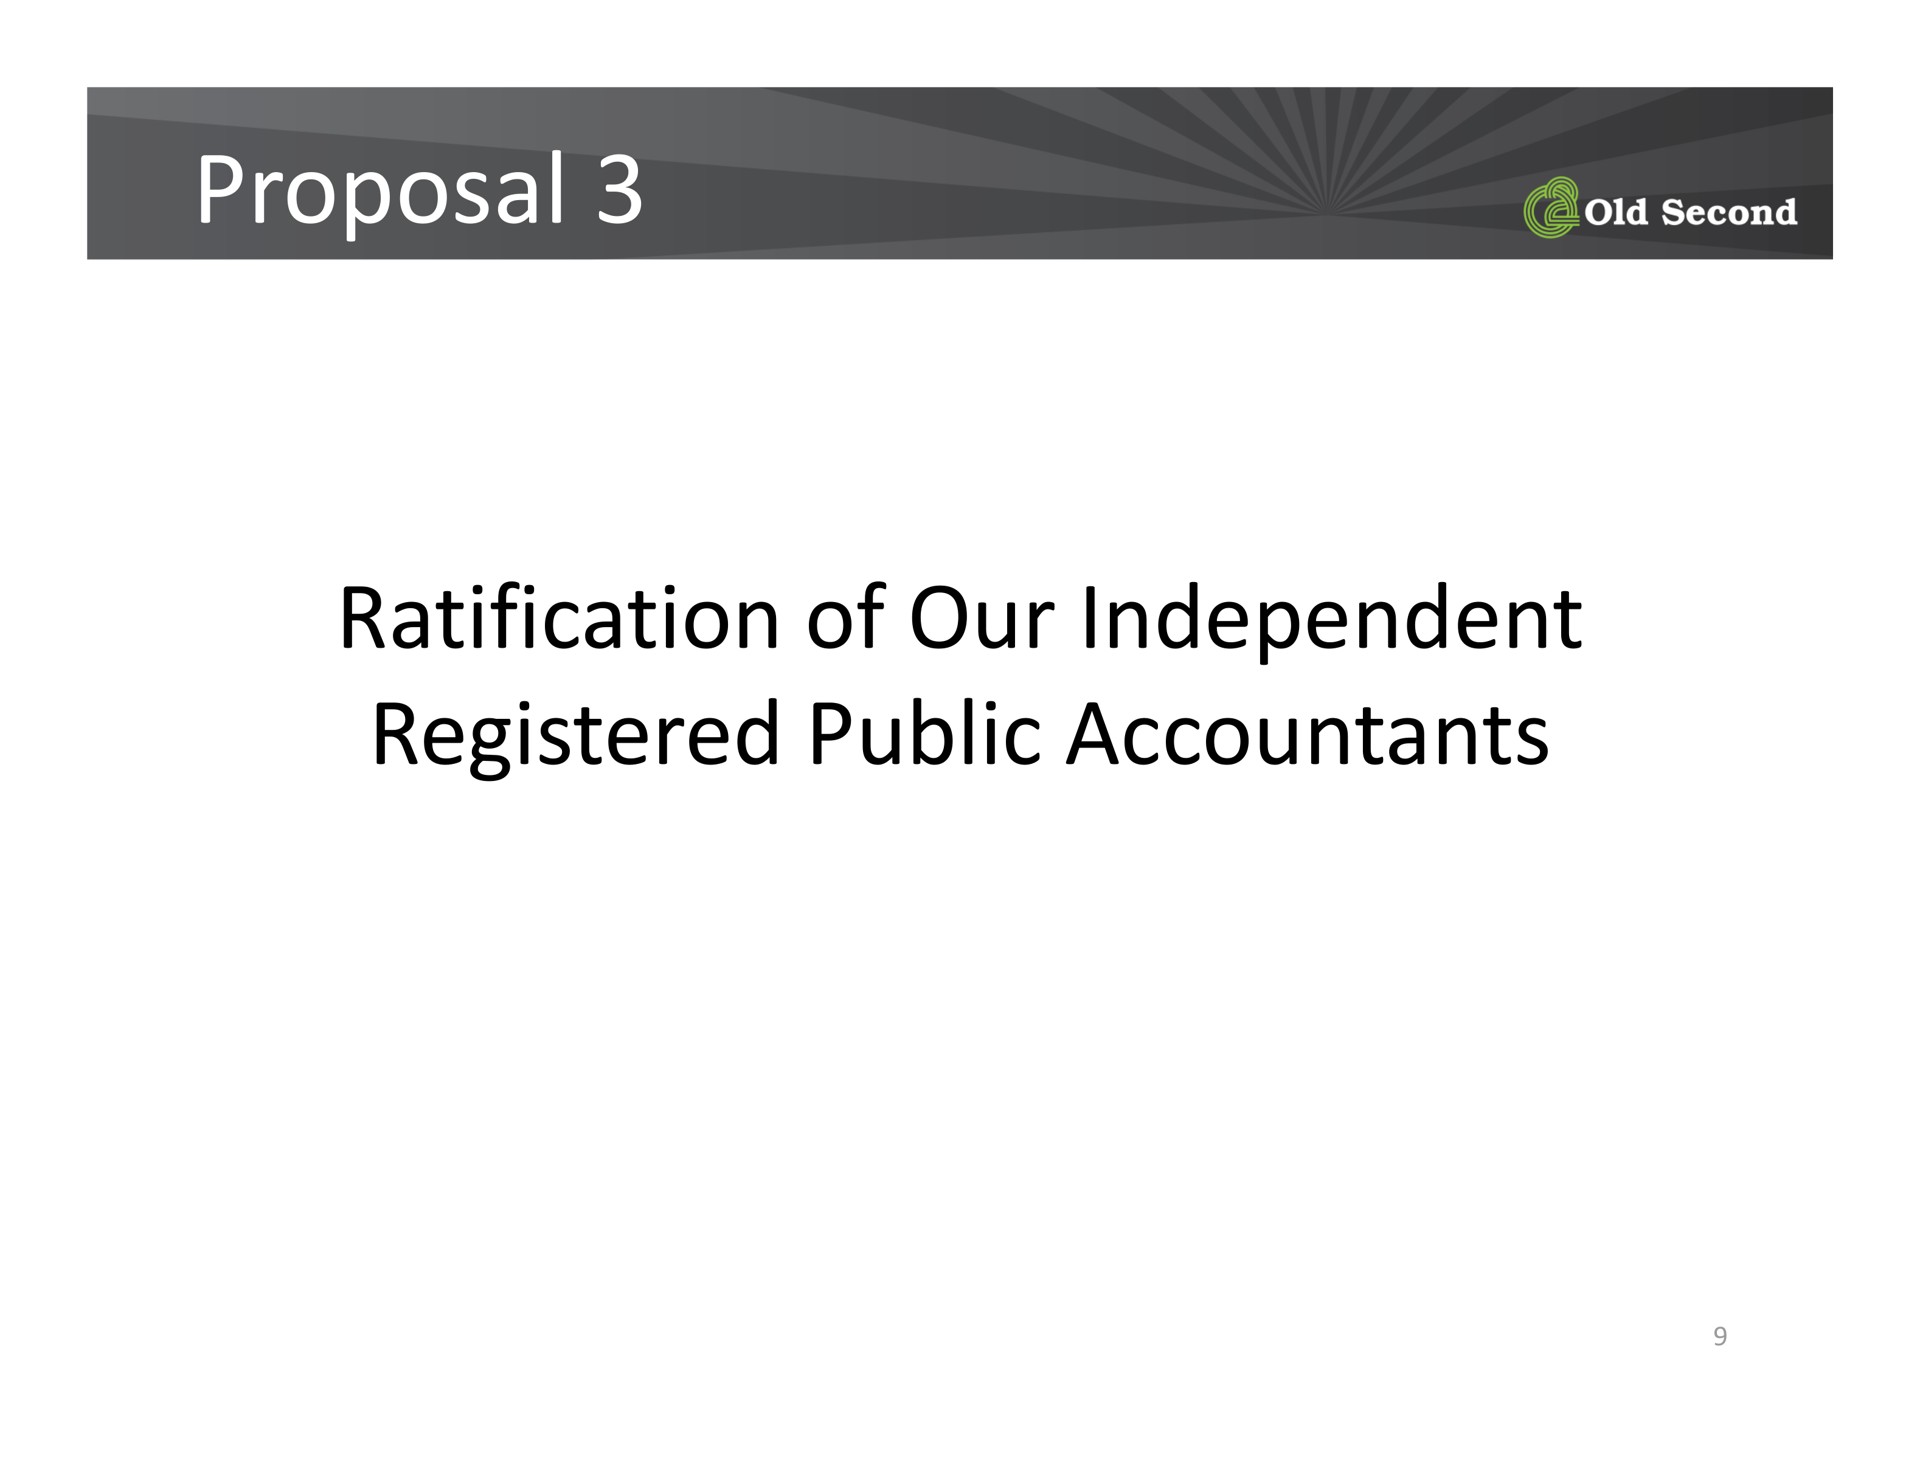 proposal ratification of our independent registered public accountants a a old second | Old Second Bancorp